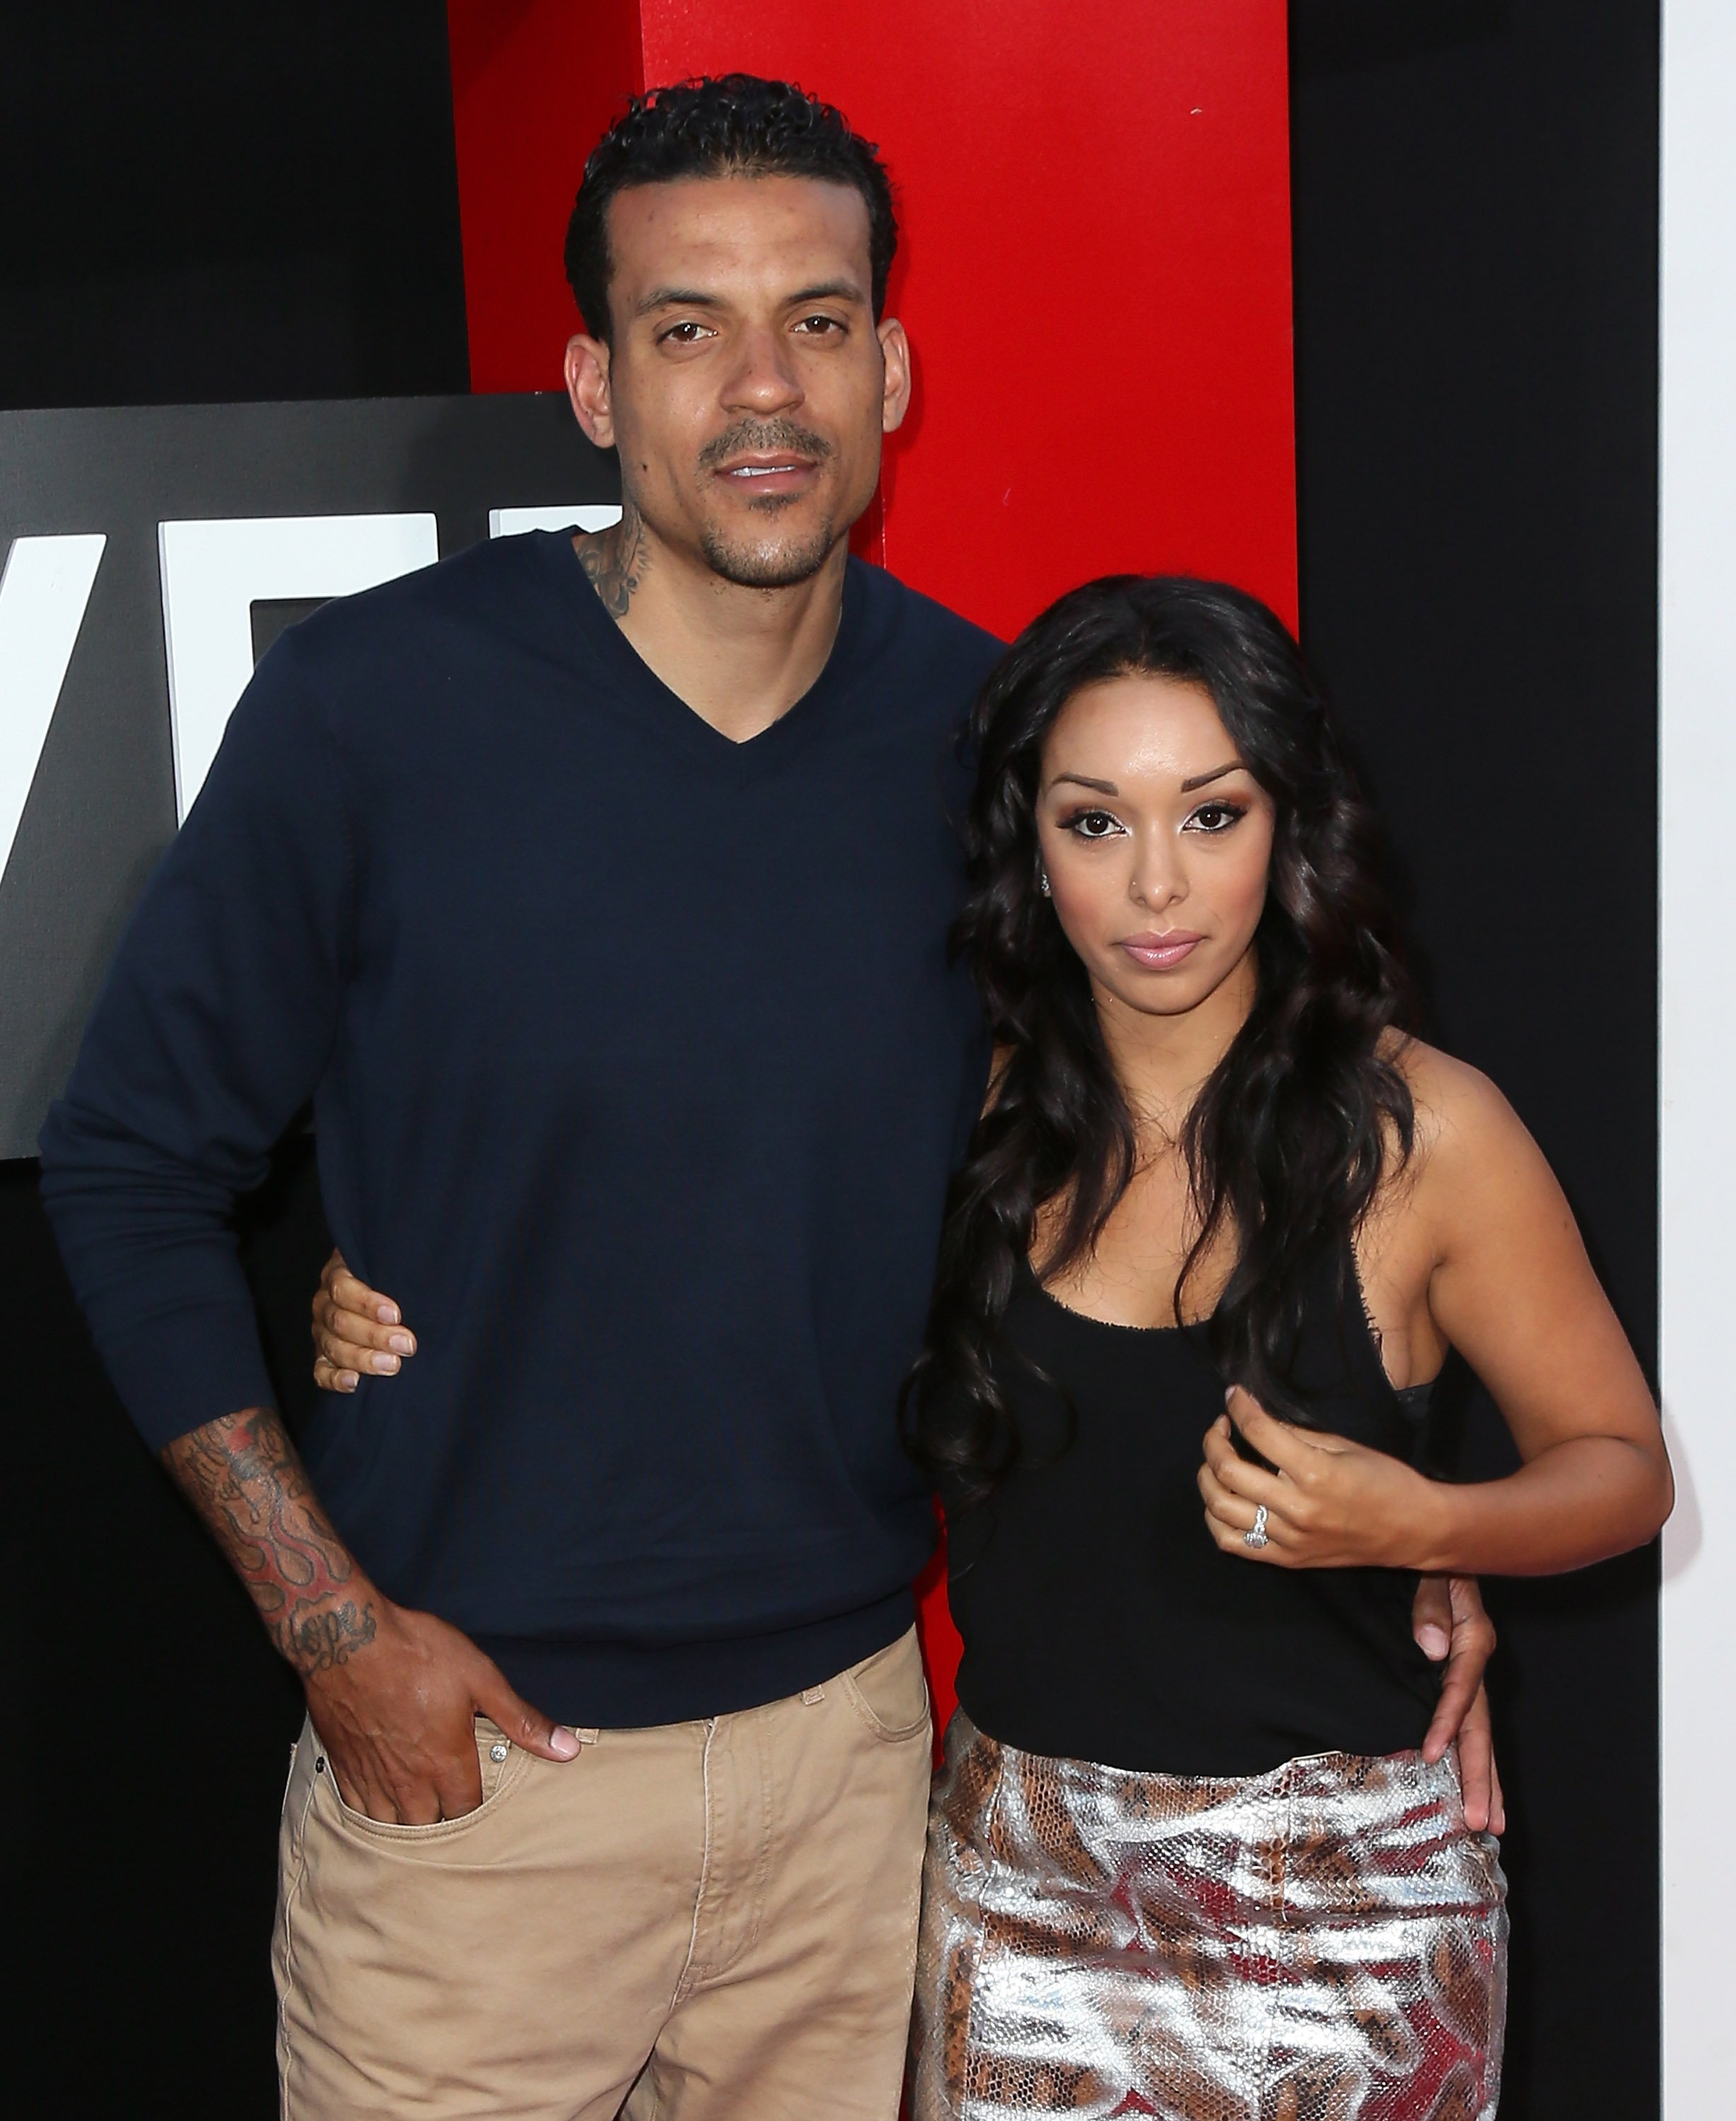 Matt Barnes and Gloria Govan attend the premiere of Warner Bros. Pictures' "Hangover Part III" on May 20, 2013 in Westwood, California.  | Photo: Getty Images